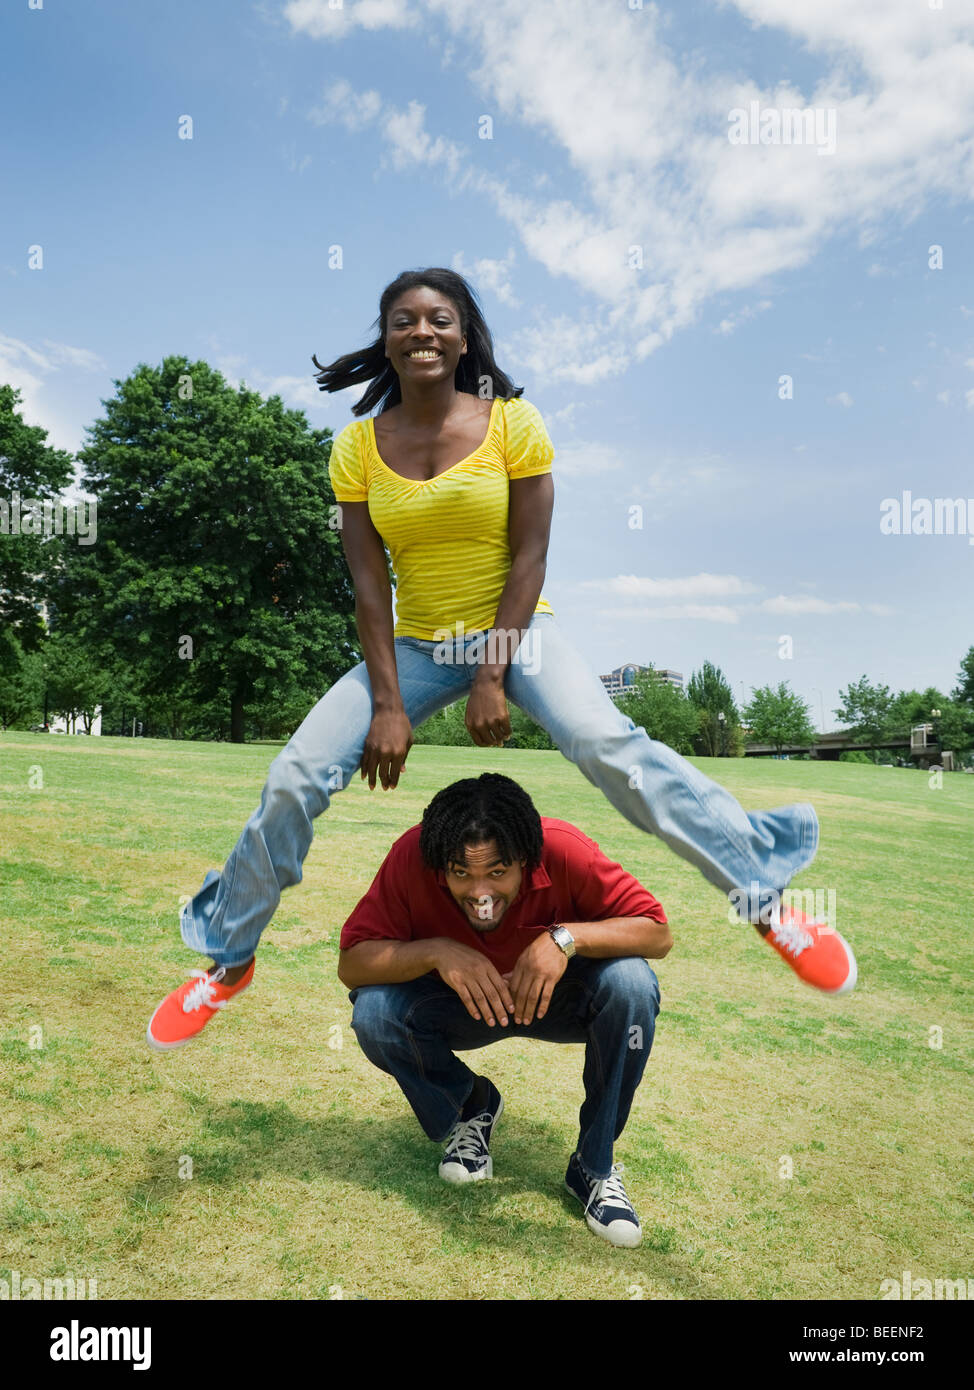 Woman leaping over man in park Stock Photo